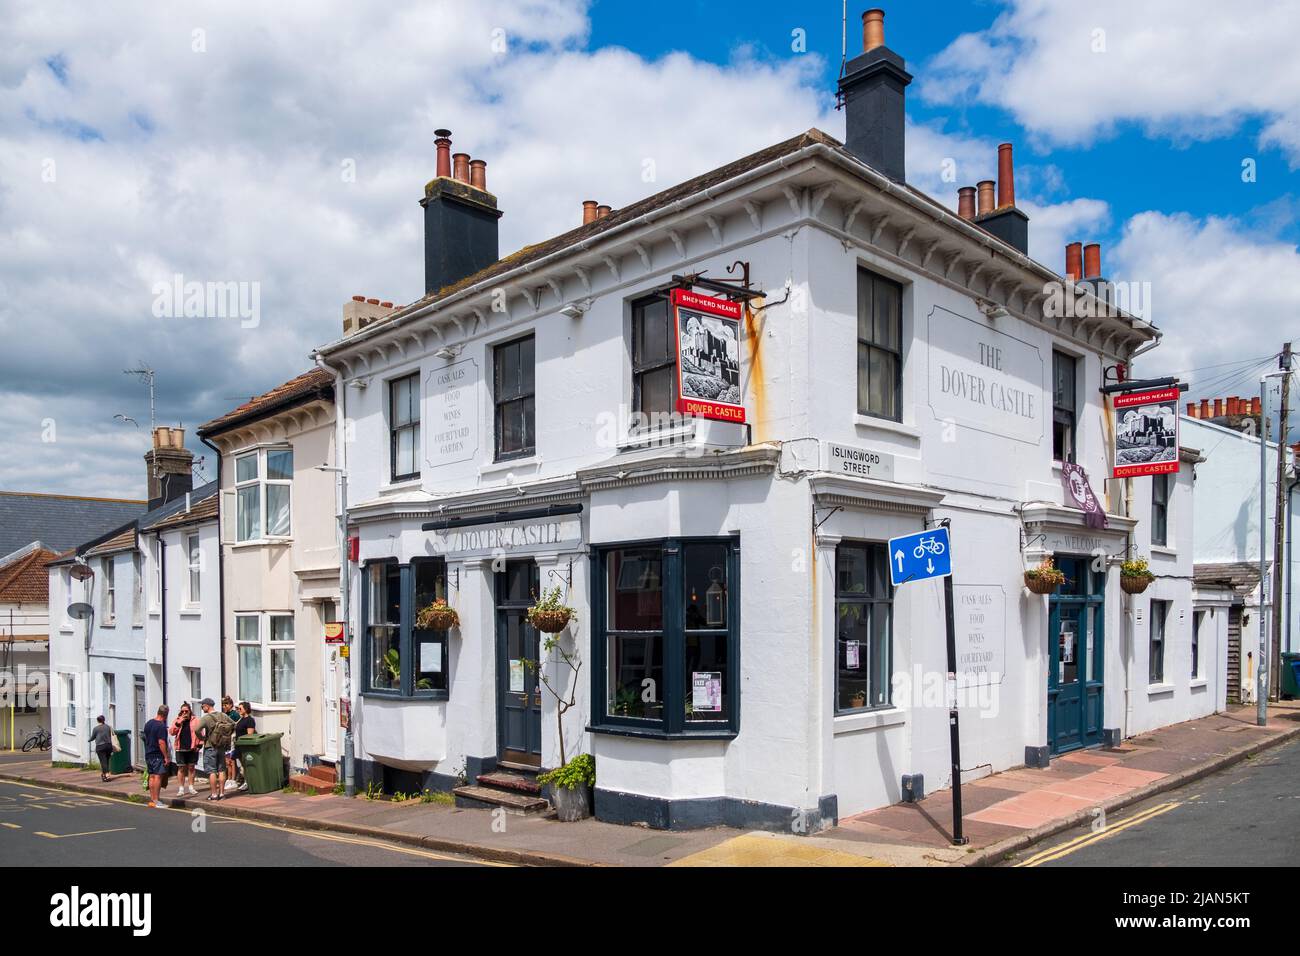 The Dover Castle pub on Southover Street in the Hanover neighbourhood of Brighton Stock Photo